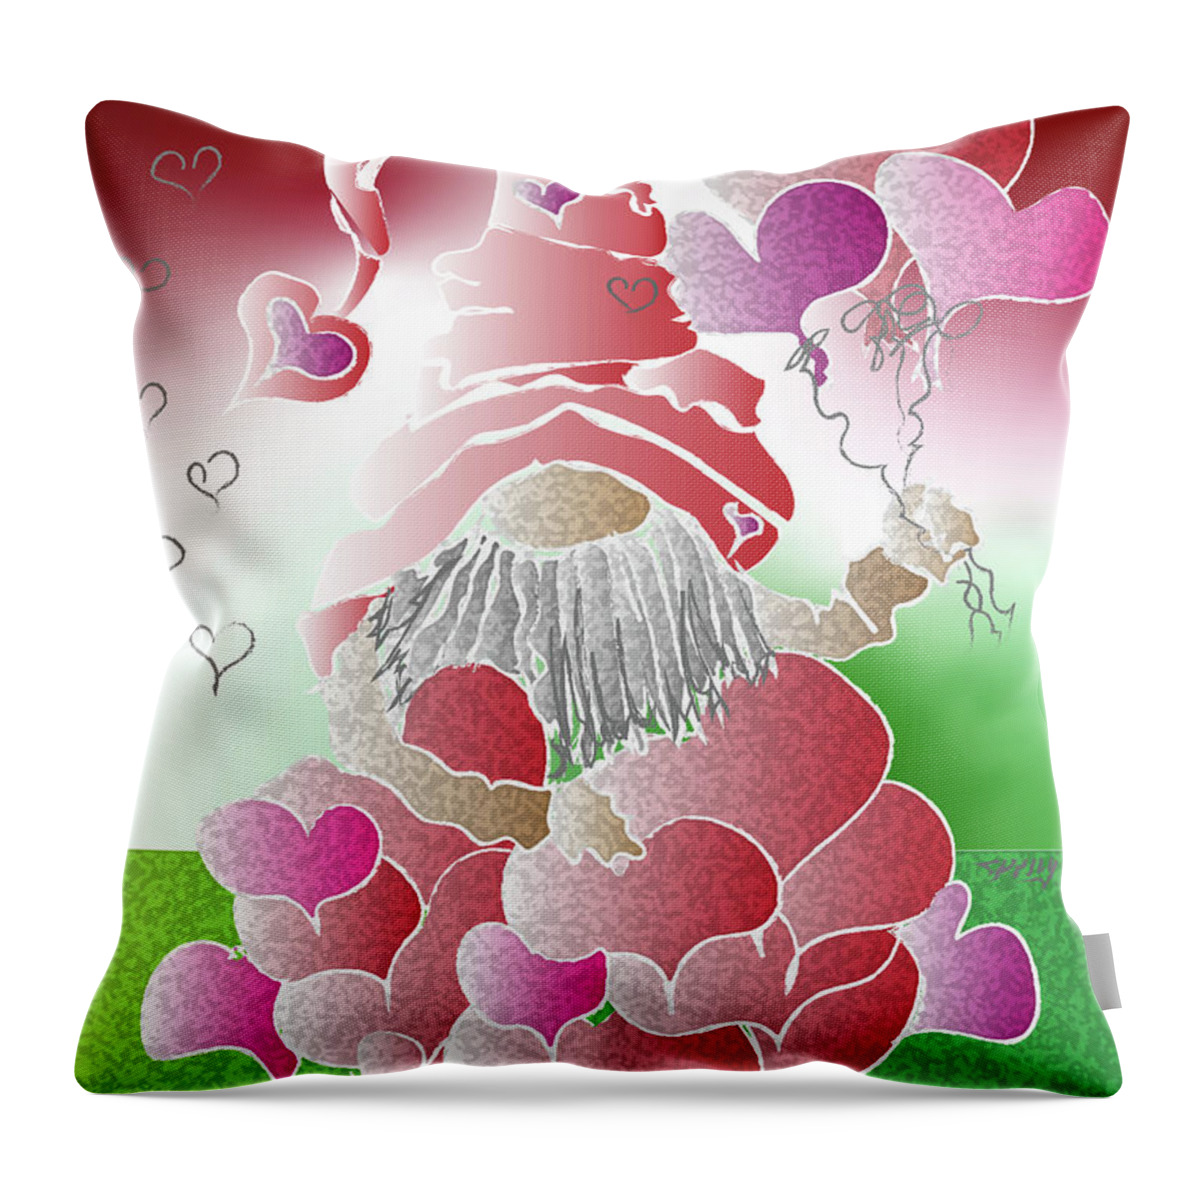 Pink Throw Pillow featuring the digital art Hearts Of Gnome by Eileen Kelly